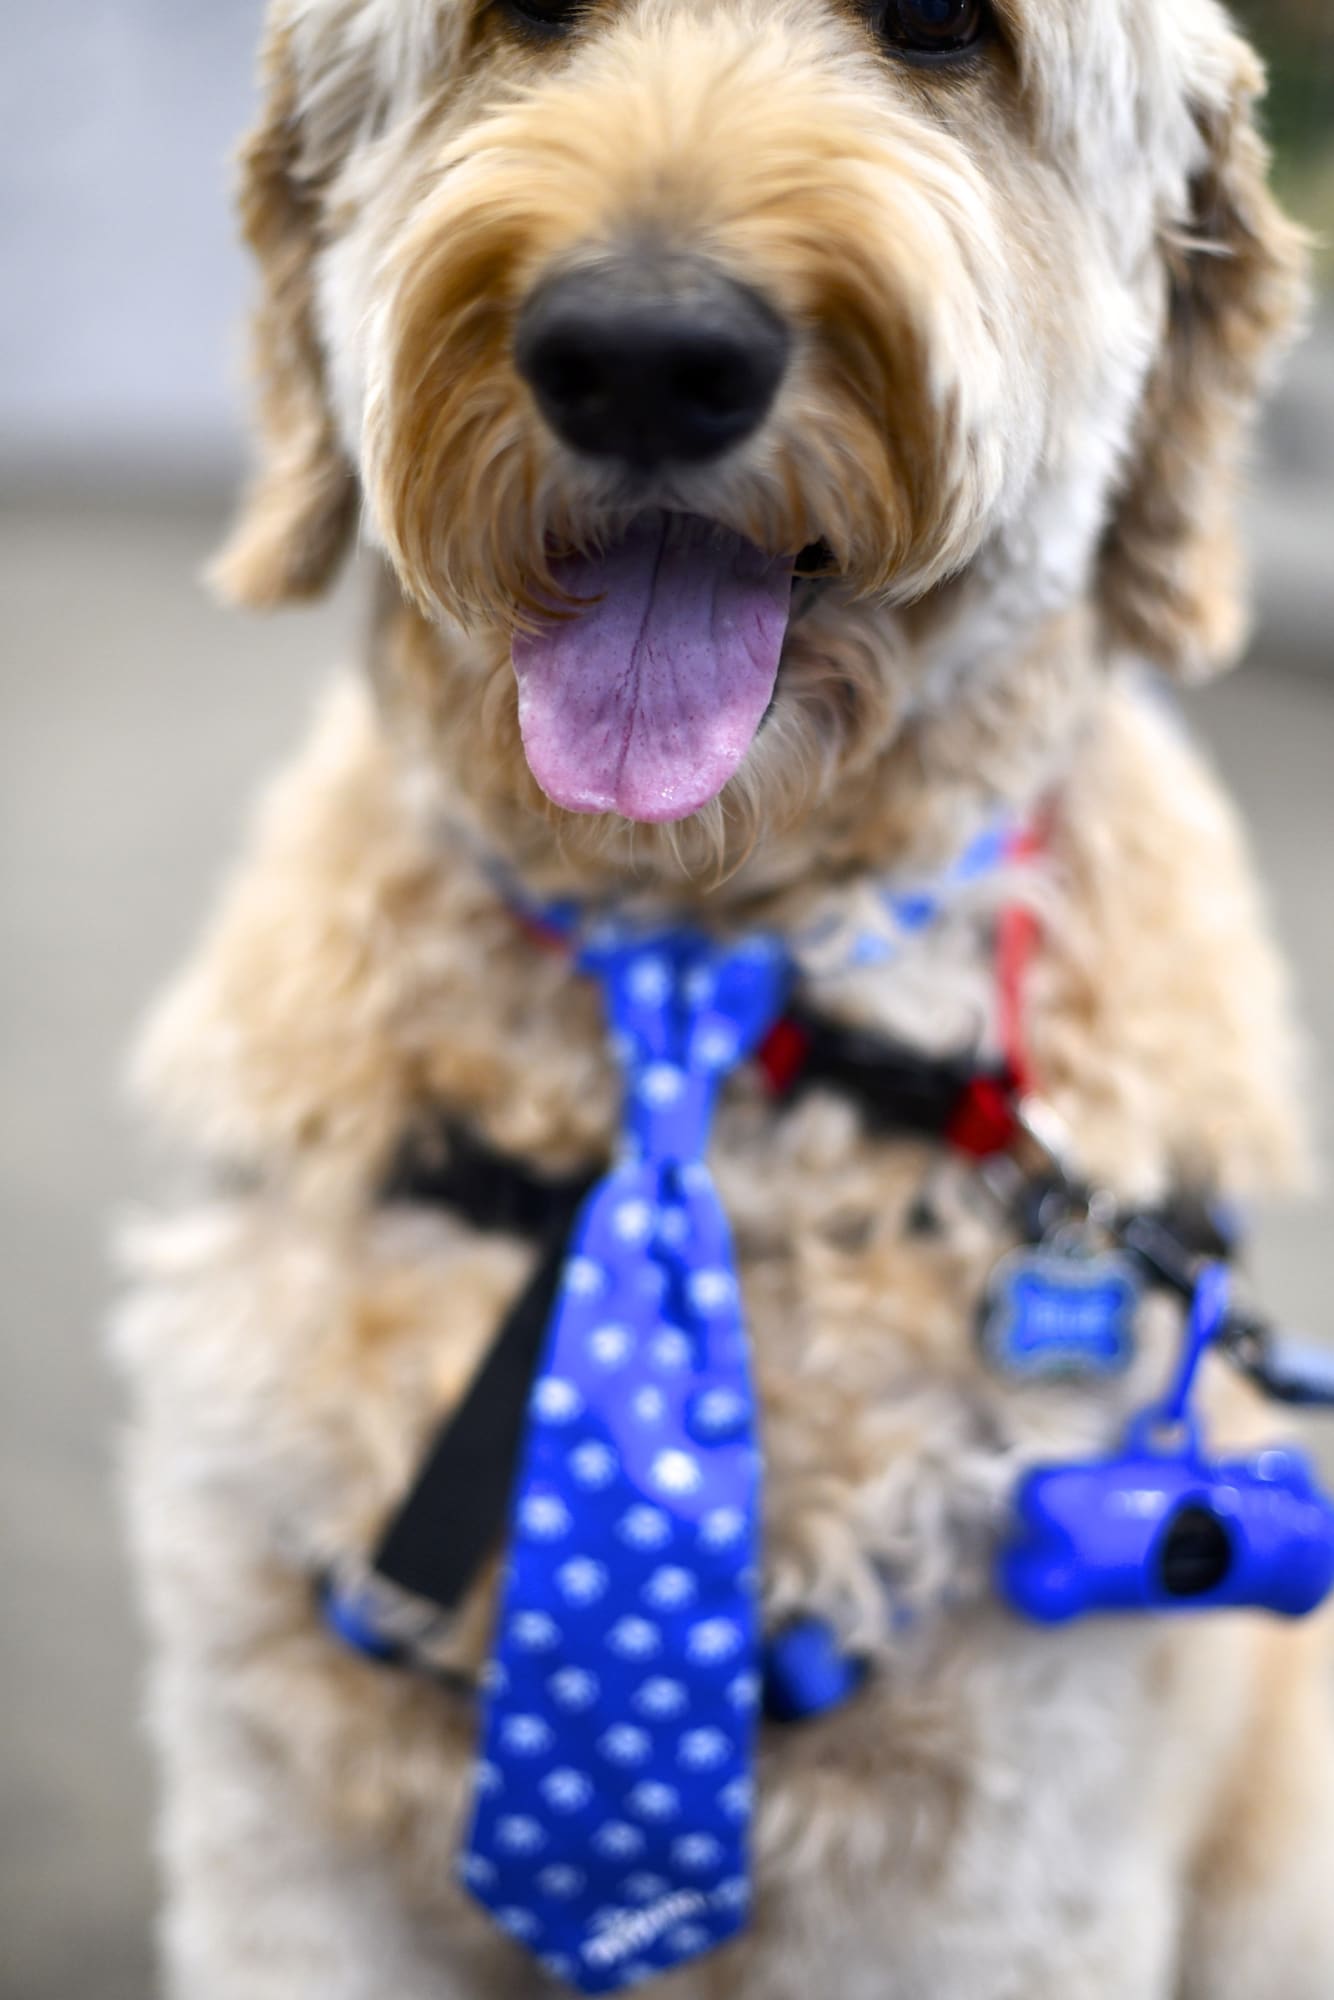 2021 National Dog Show Therapy Dog Symposium held Tuesday